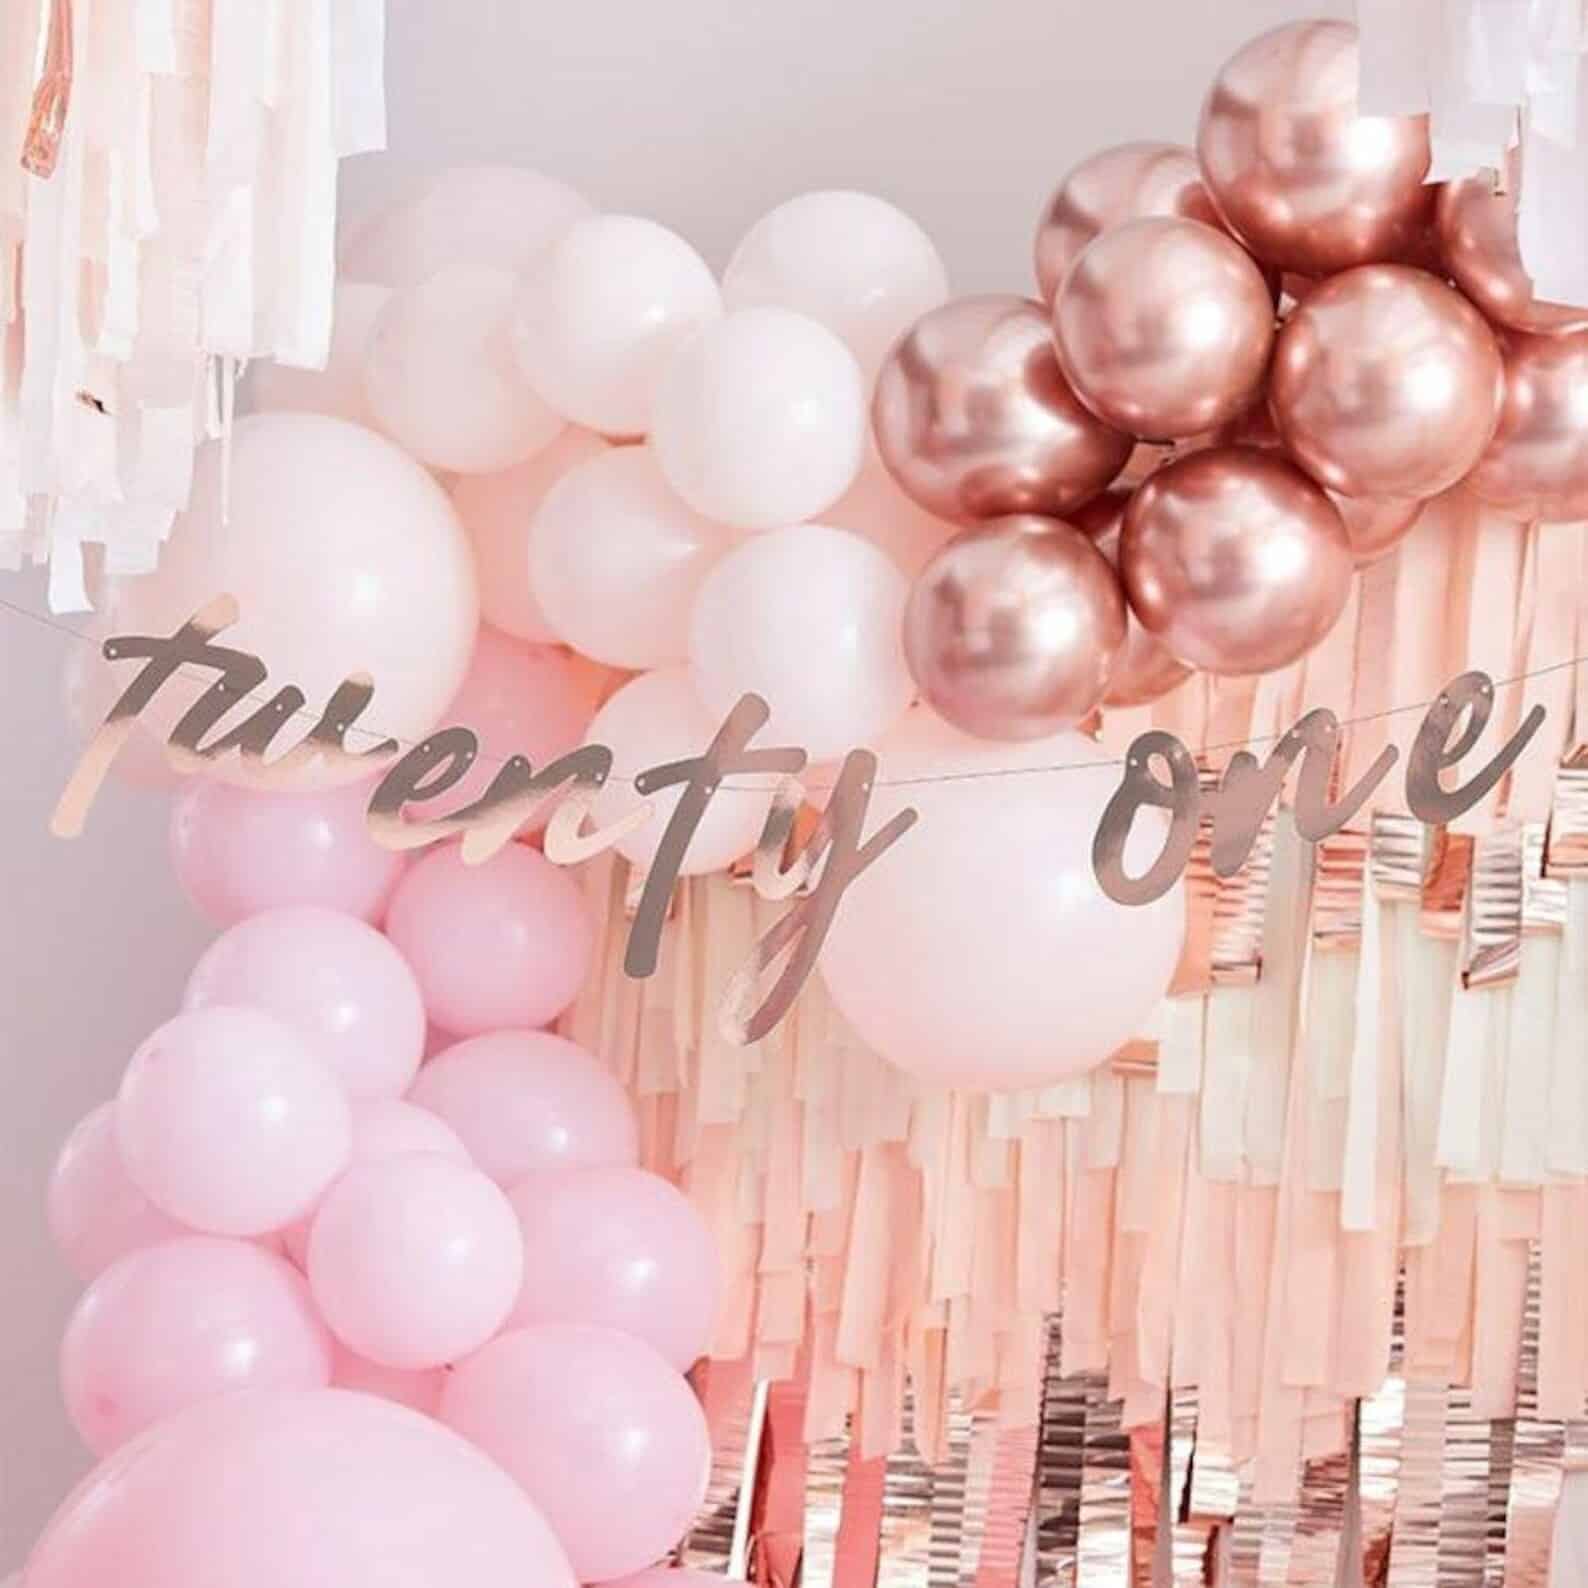 These Trendy 21st Birthday Decorations Are Guaranteed To Make It A Birthday She'll Never Forget - By Sophia Lee